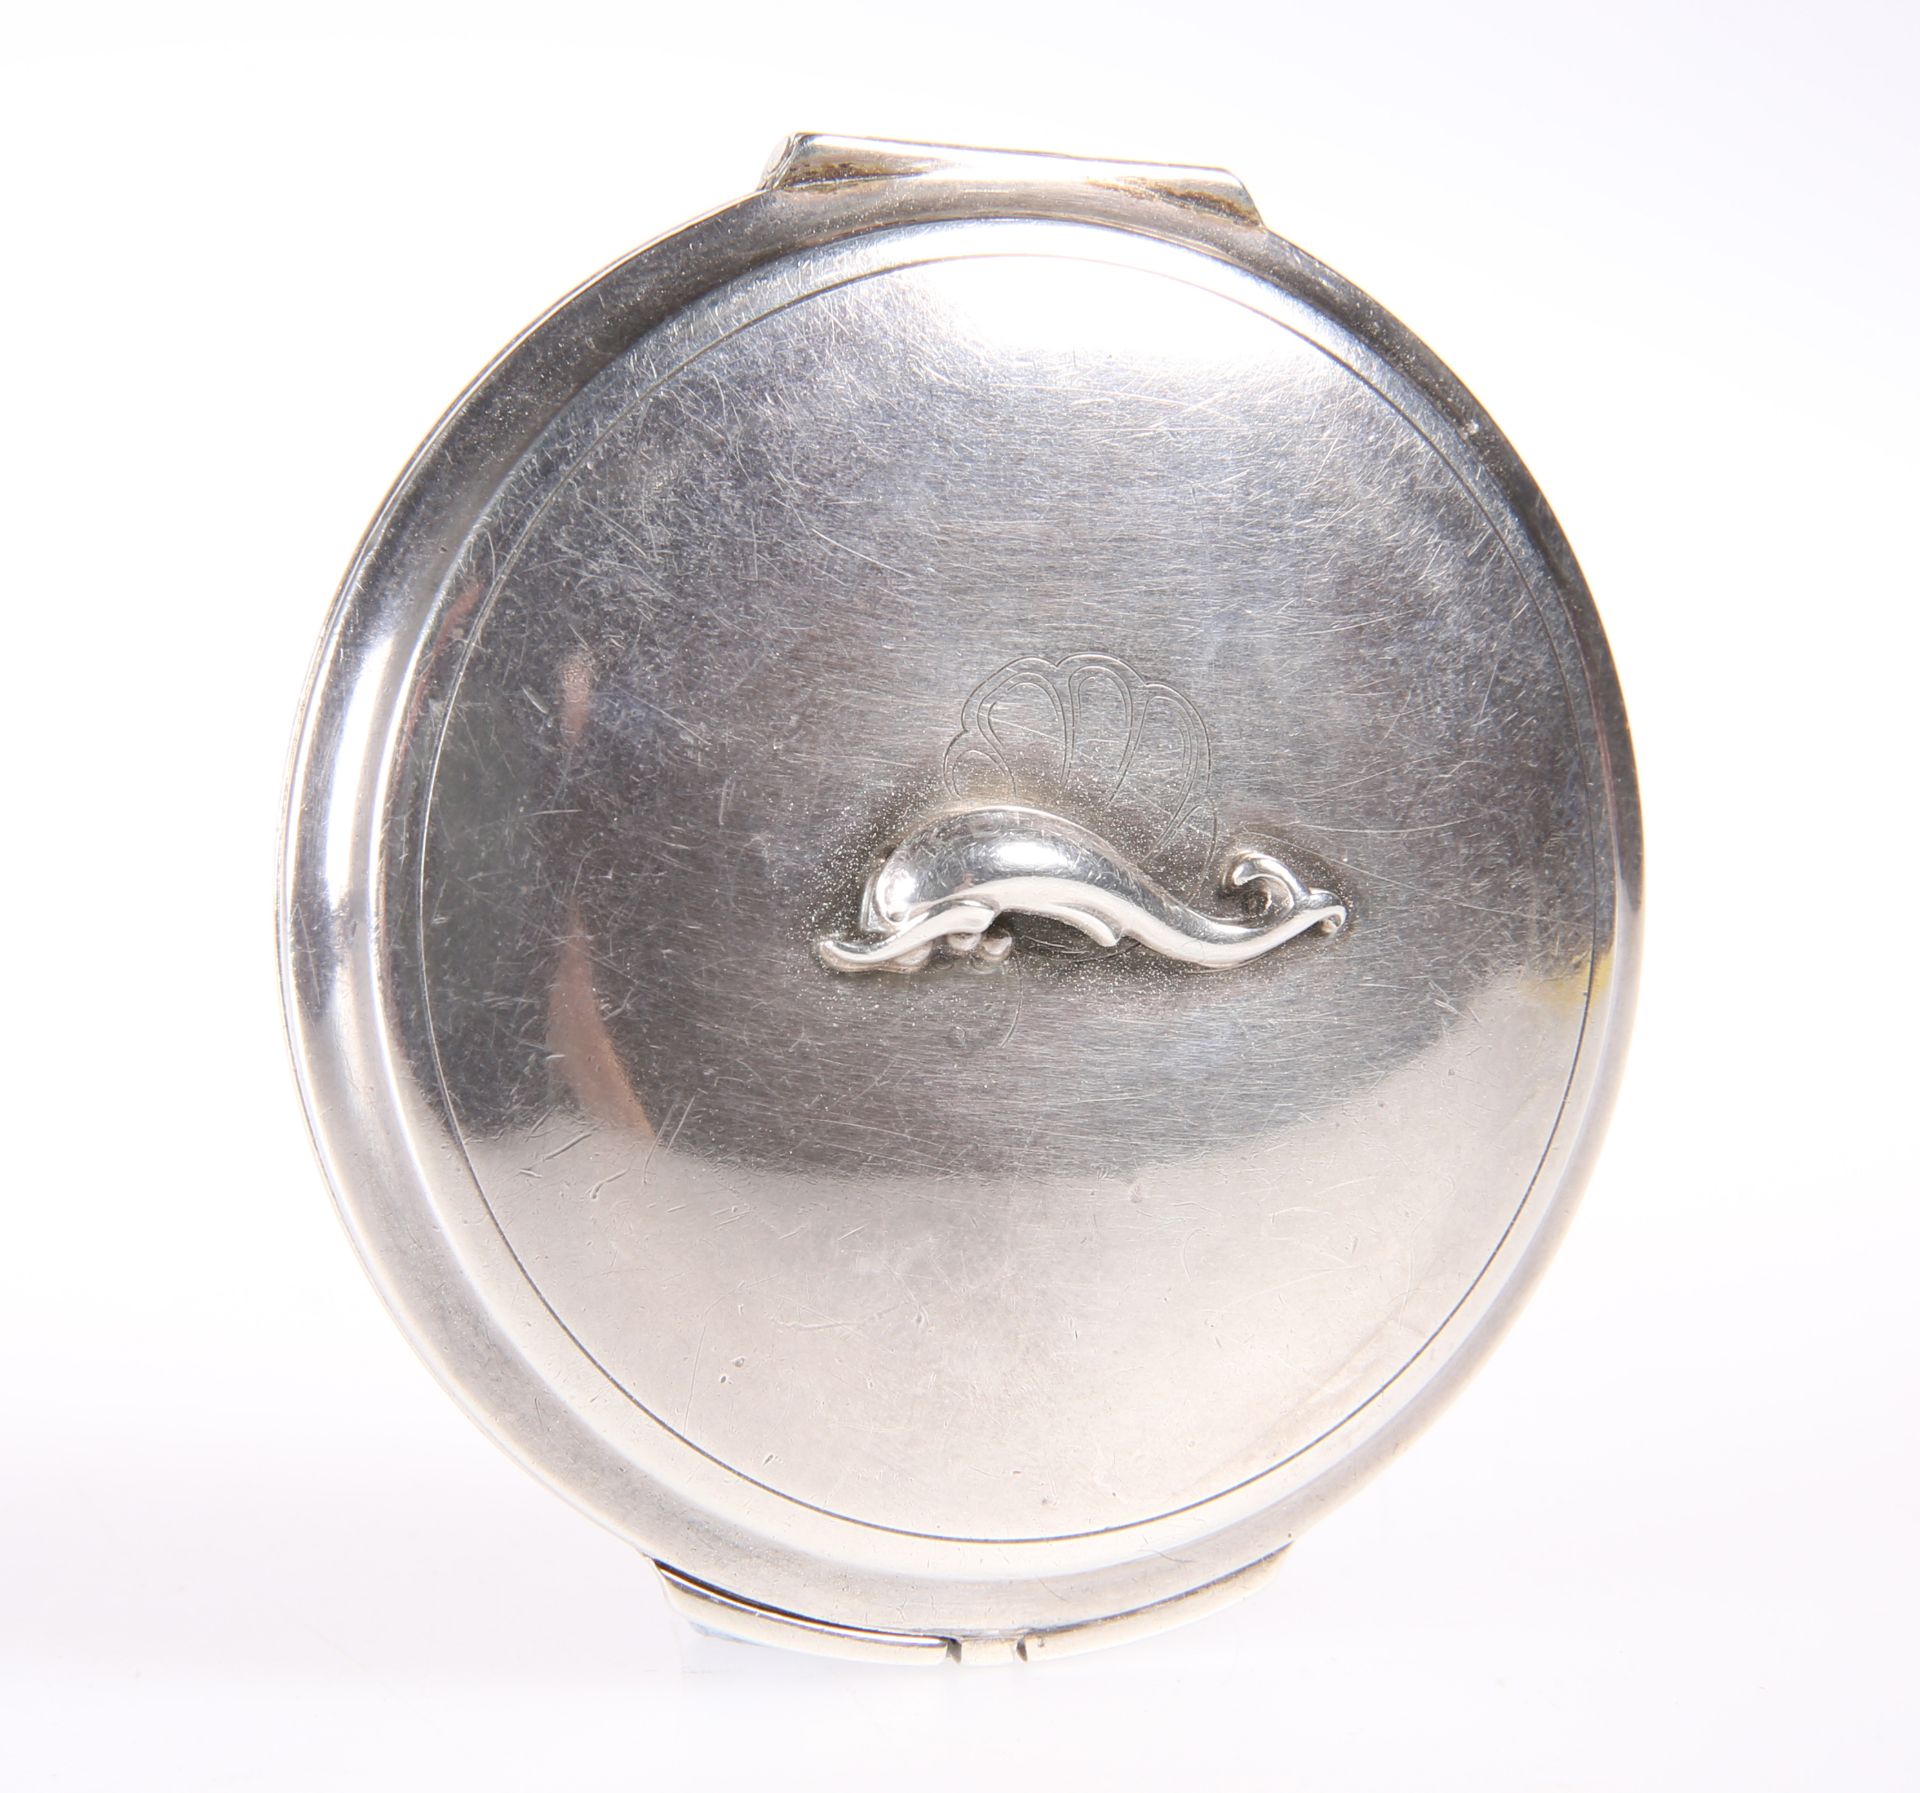 GEORG JENSEN, A SILVER POWDER COMPACT, embellished with a dolphin on the lid, with mirror and pink